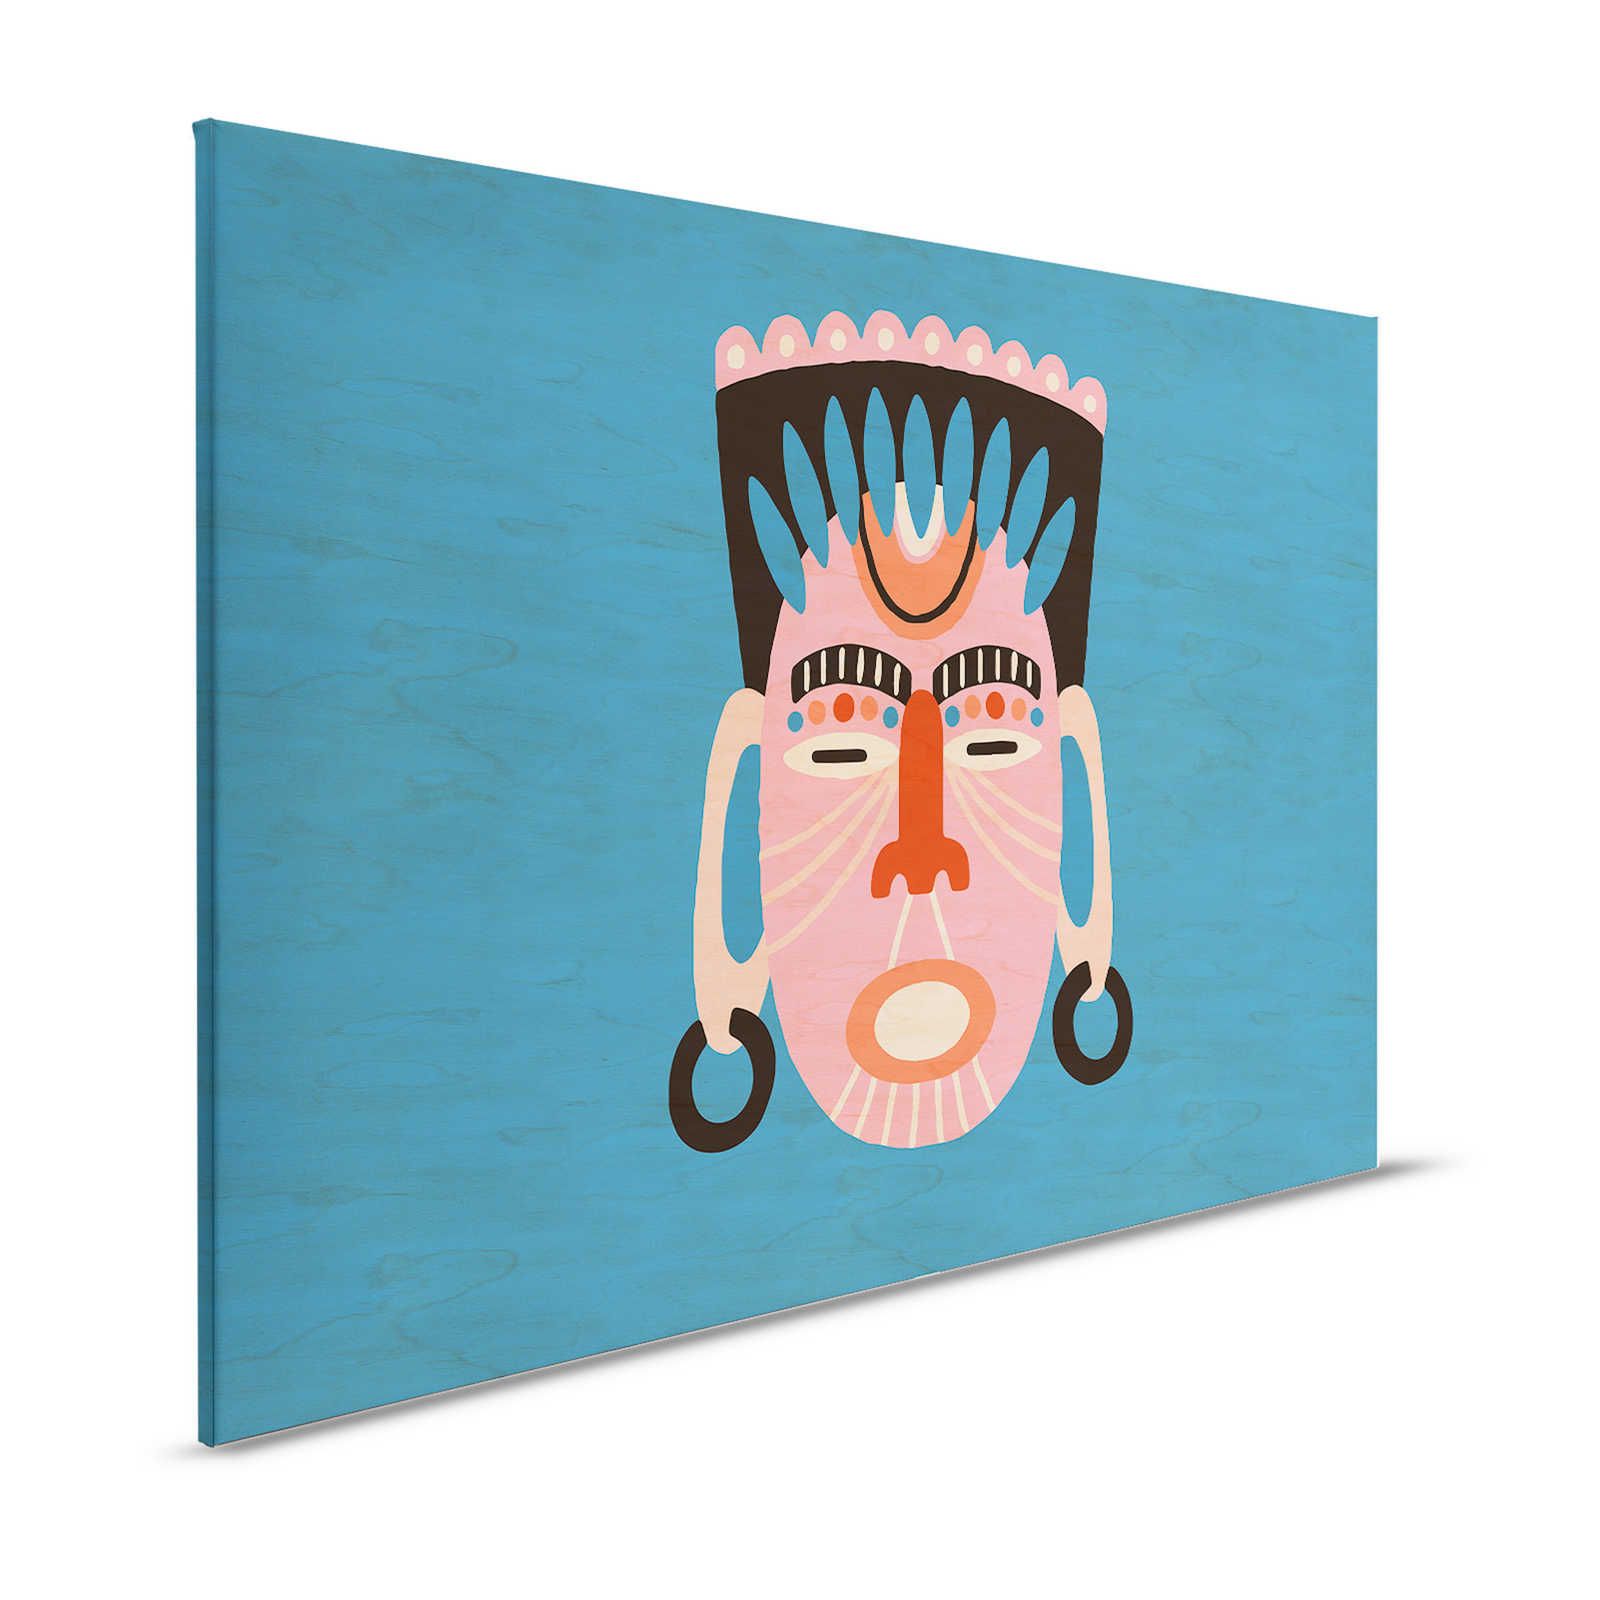 Overseas 3 - Blue Canvas painting Ethno Design with Mask - 1.20 m x 0.80 m
